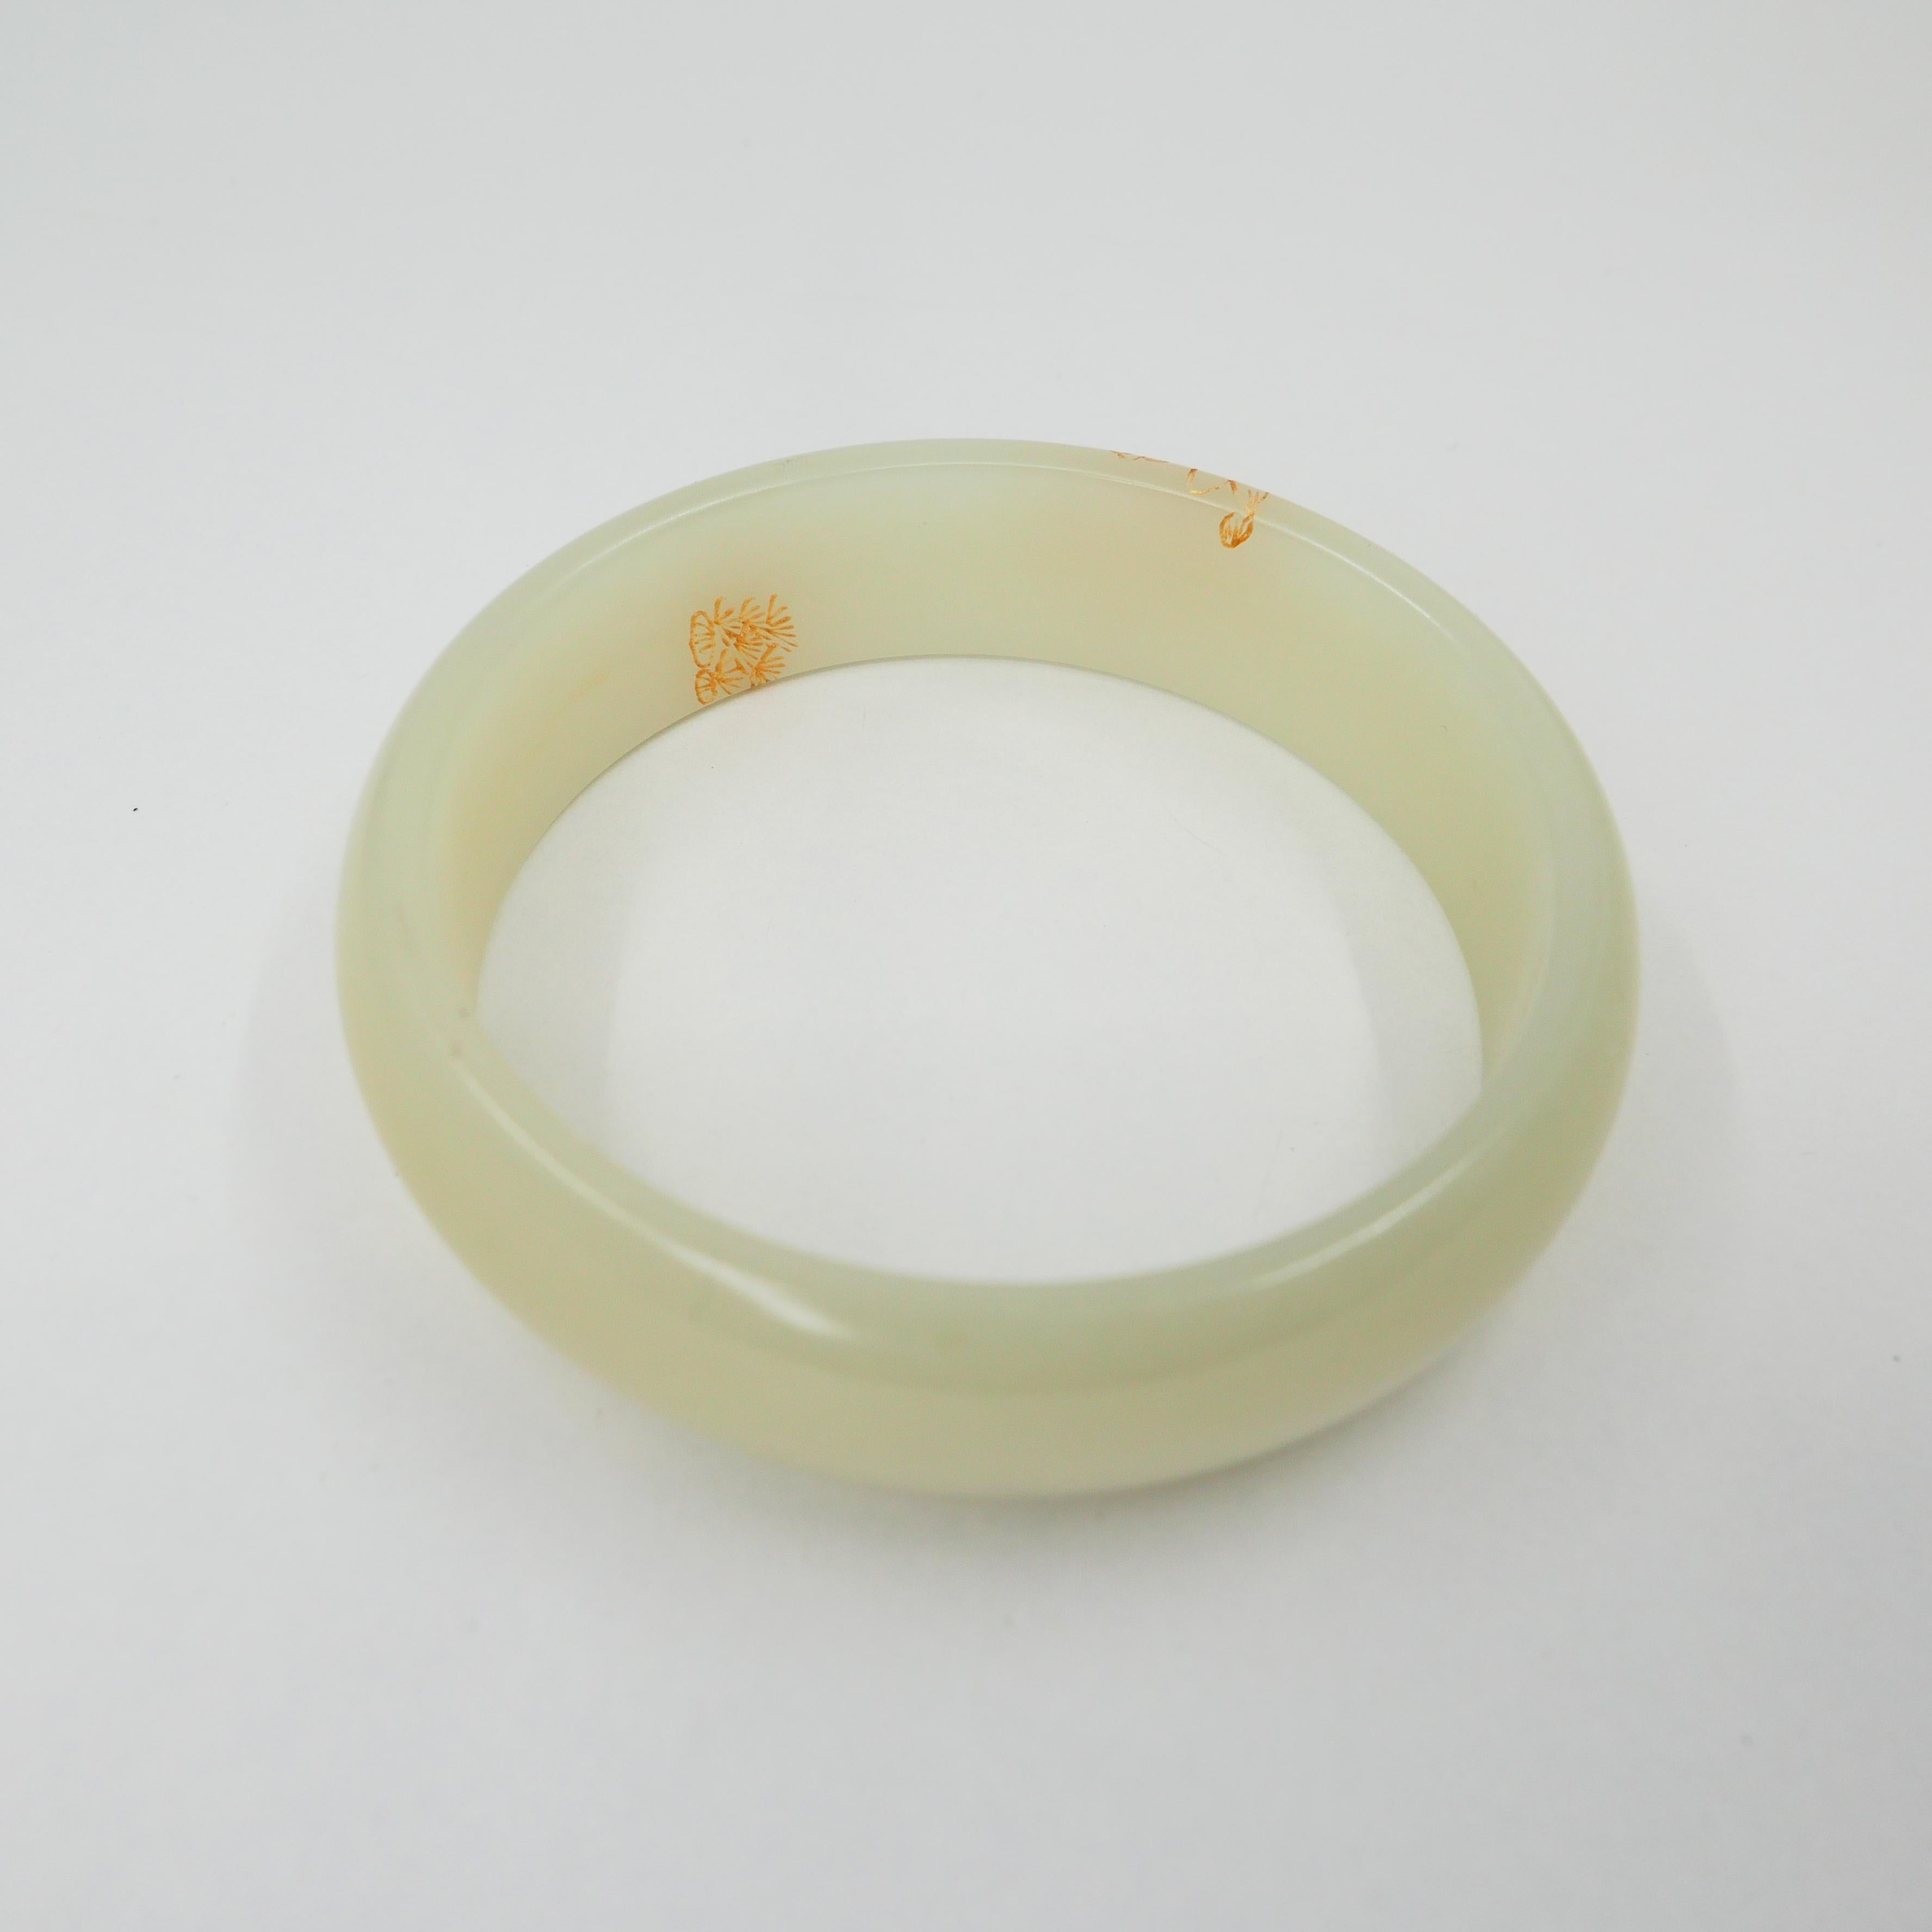 Certified Natural Nephrite White Jade Bangle Floral Gold Inlay, Flower Motif 4